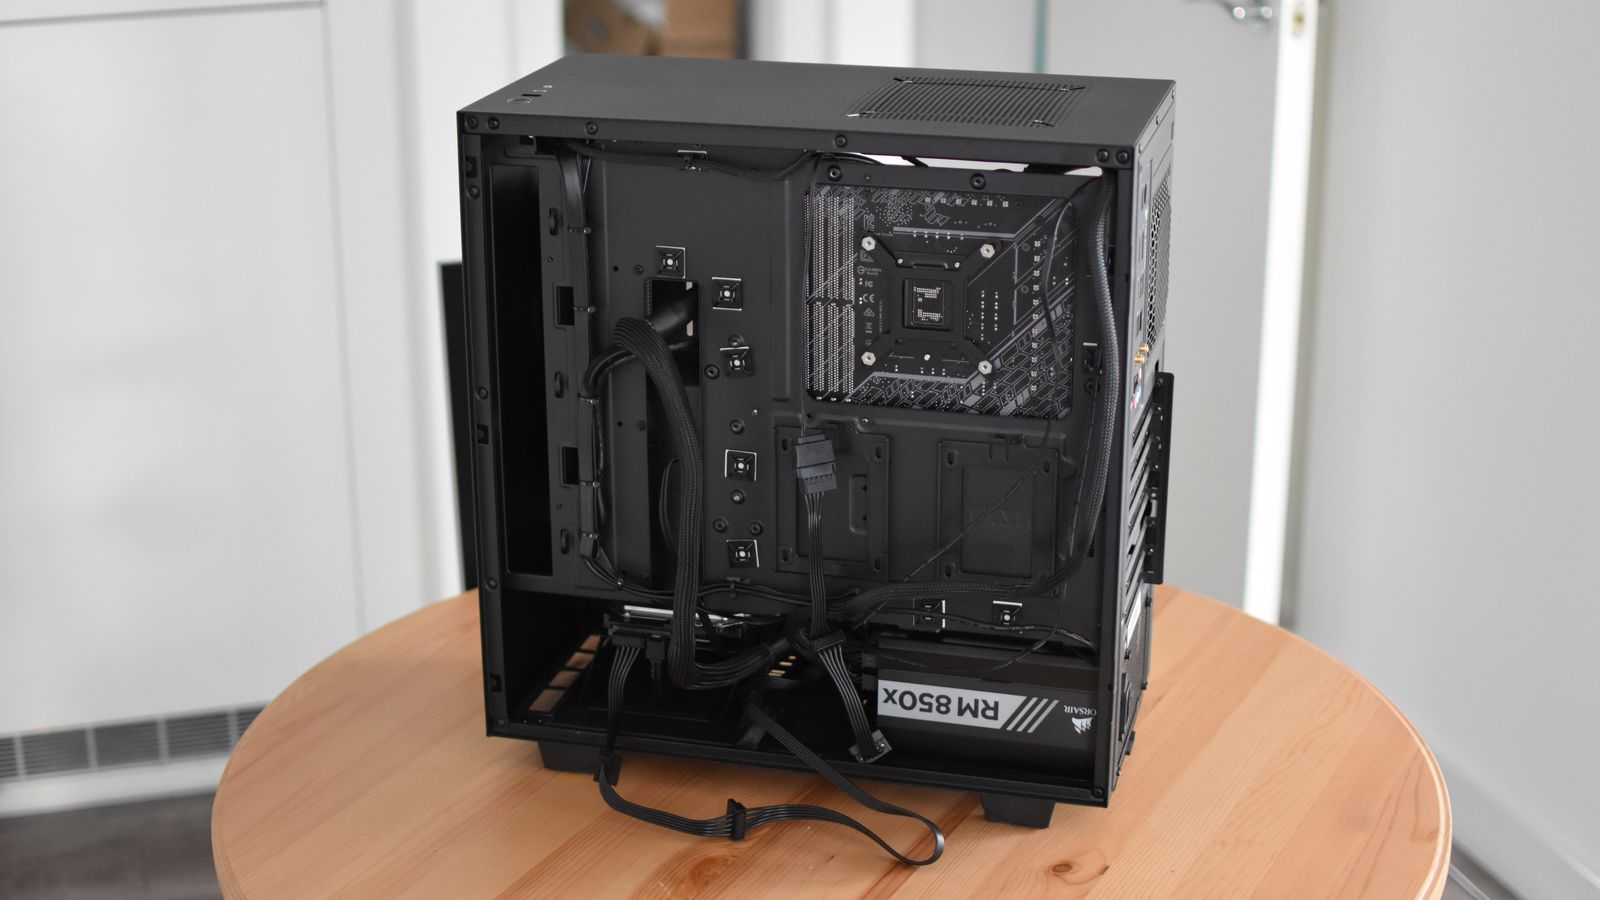 What Are The Pluggin Called On The Front Of A PC Case